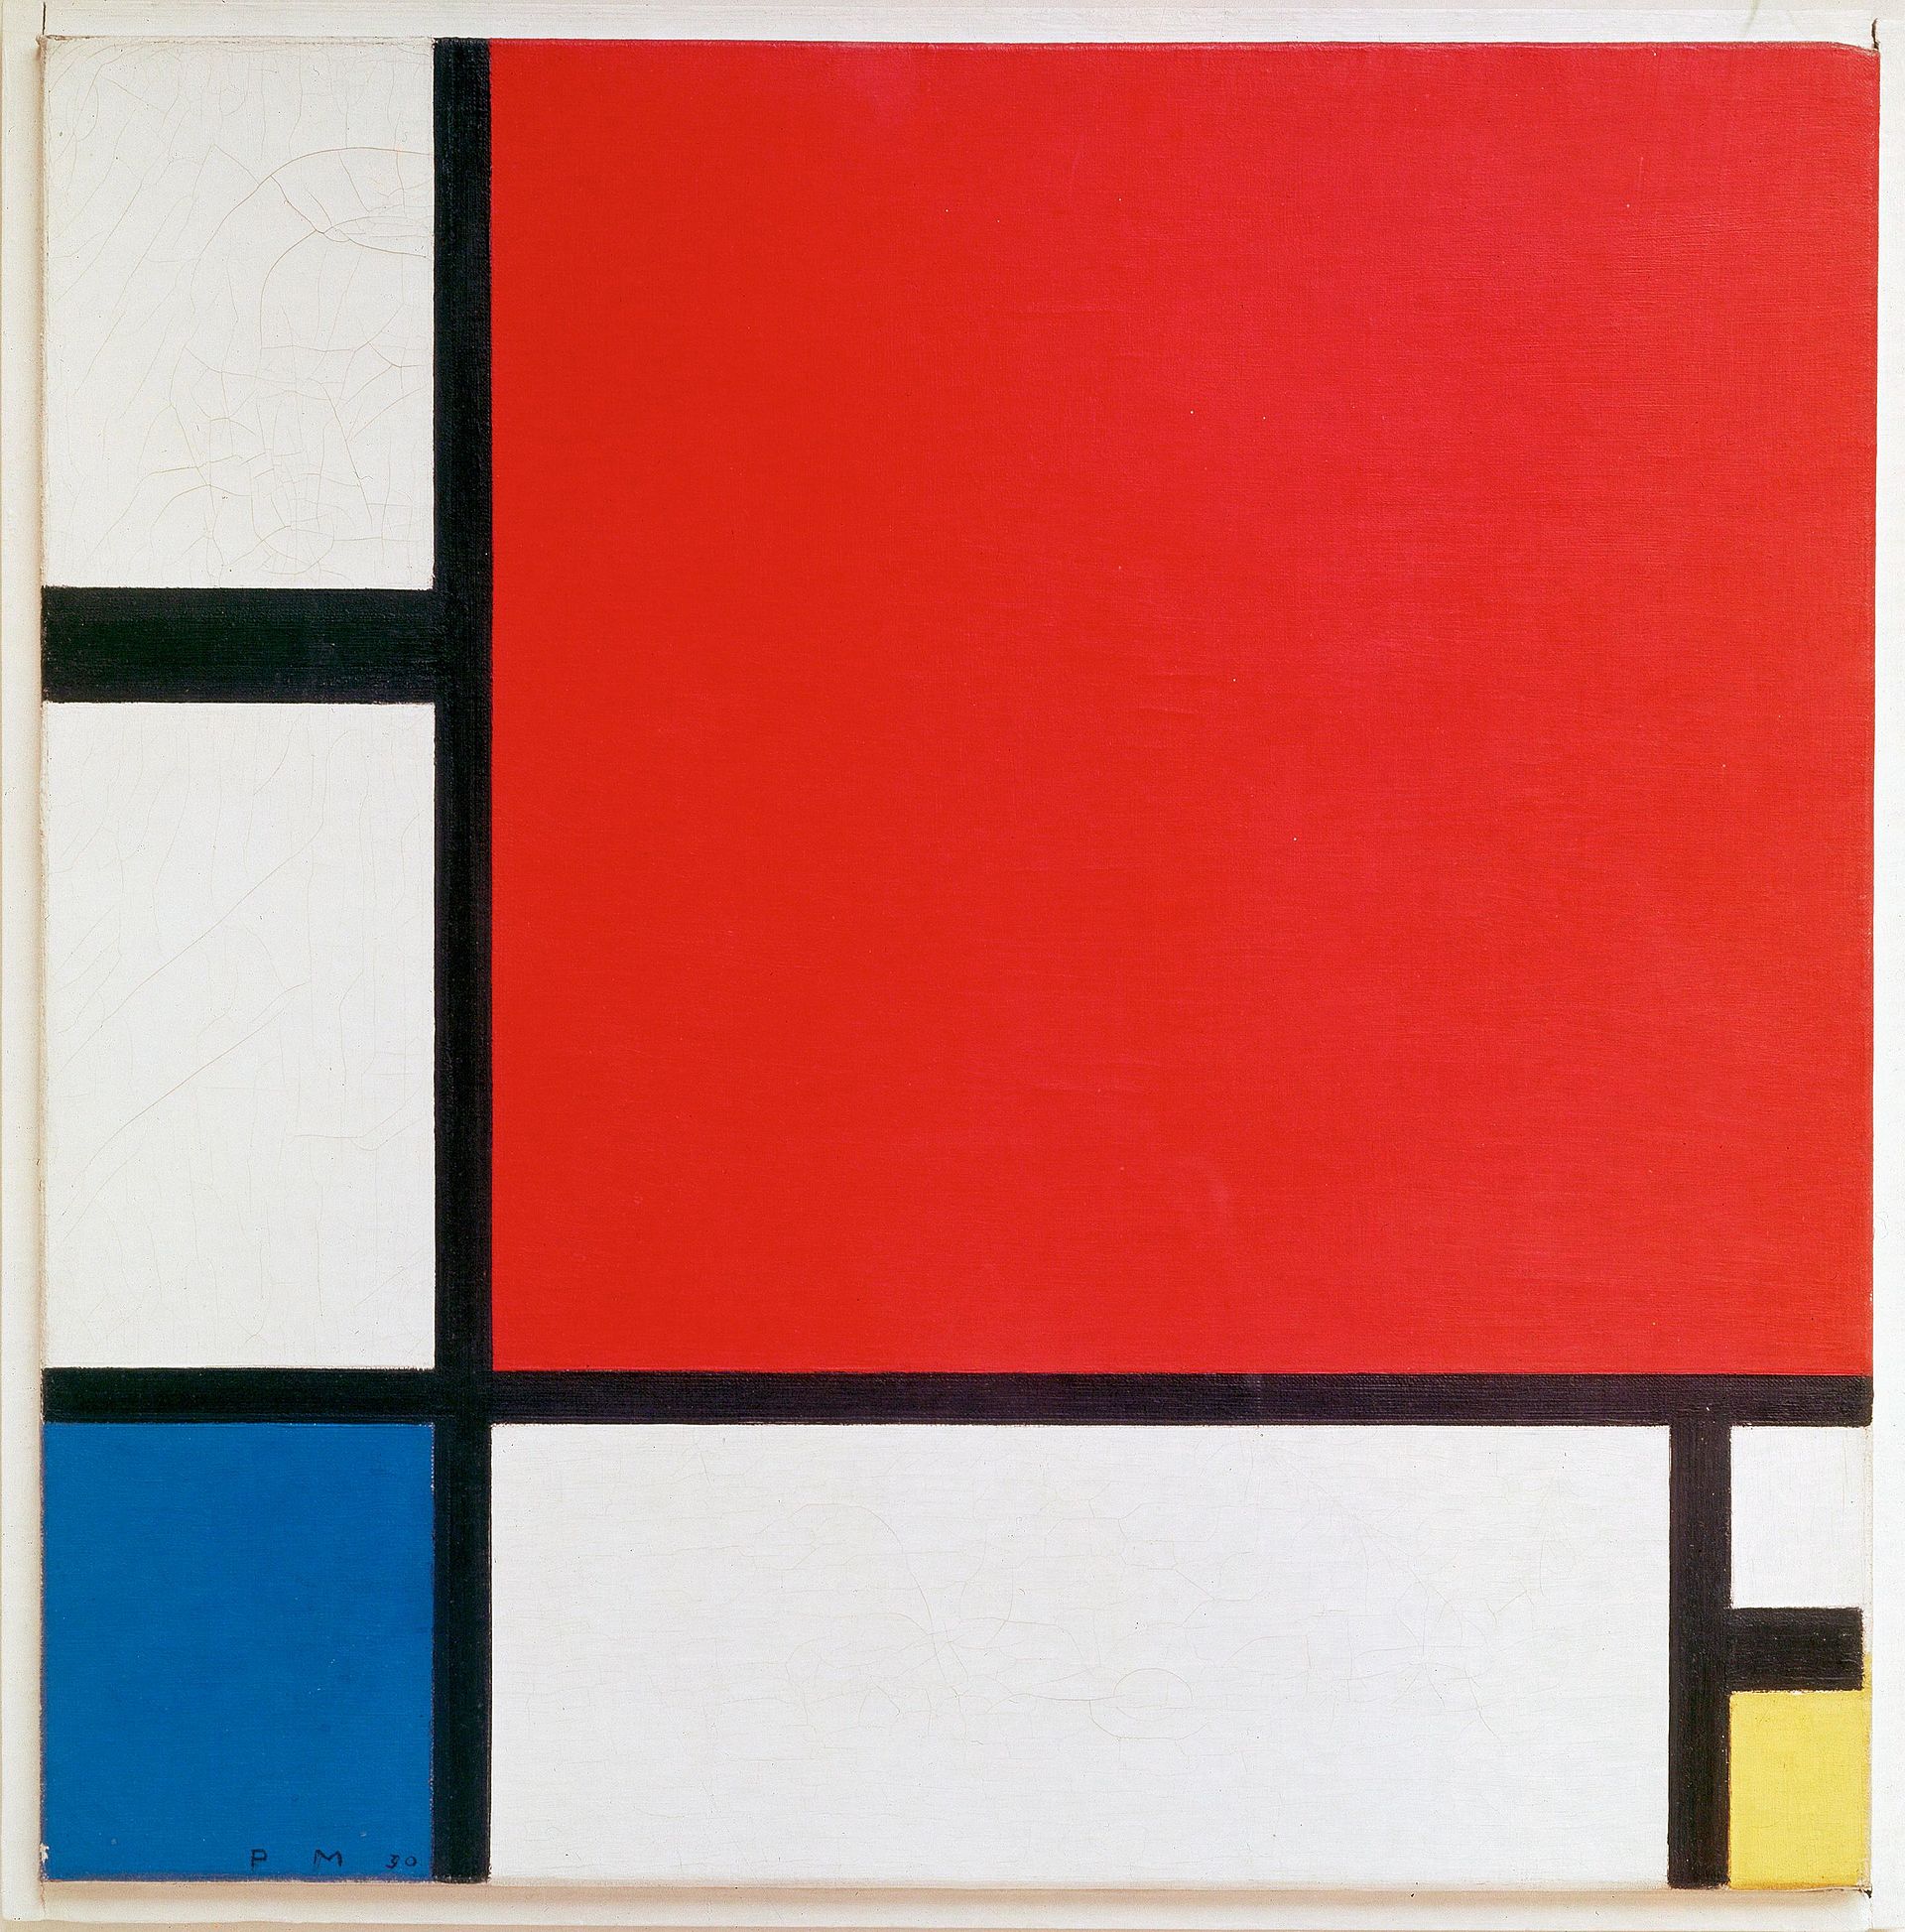 Piet Mondrian, Composition II in Red, Blue and Yellow, 1930